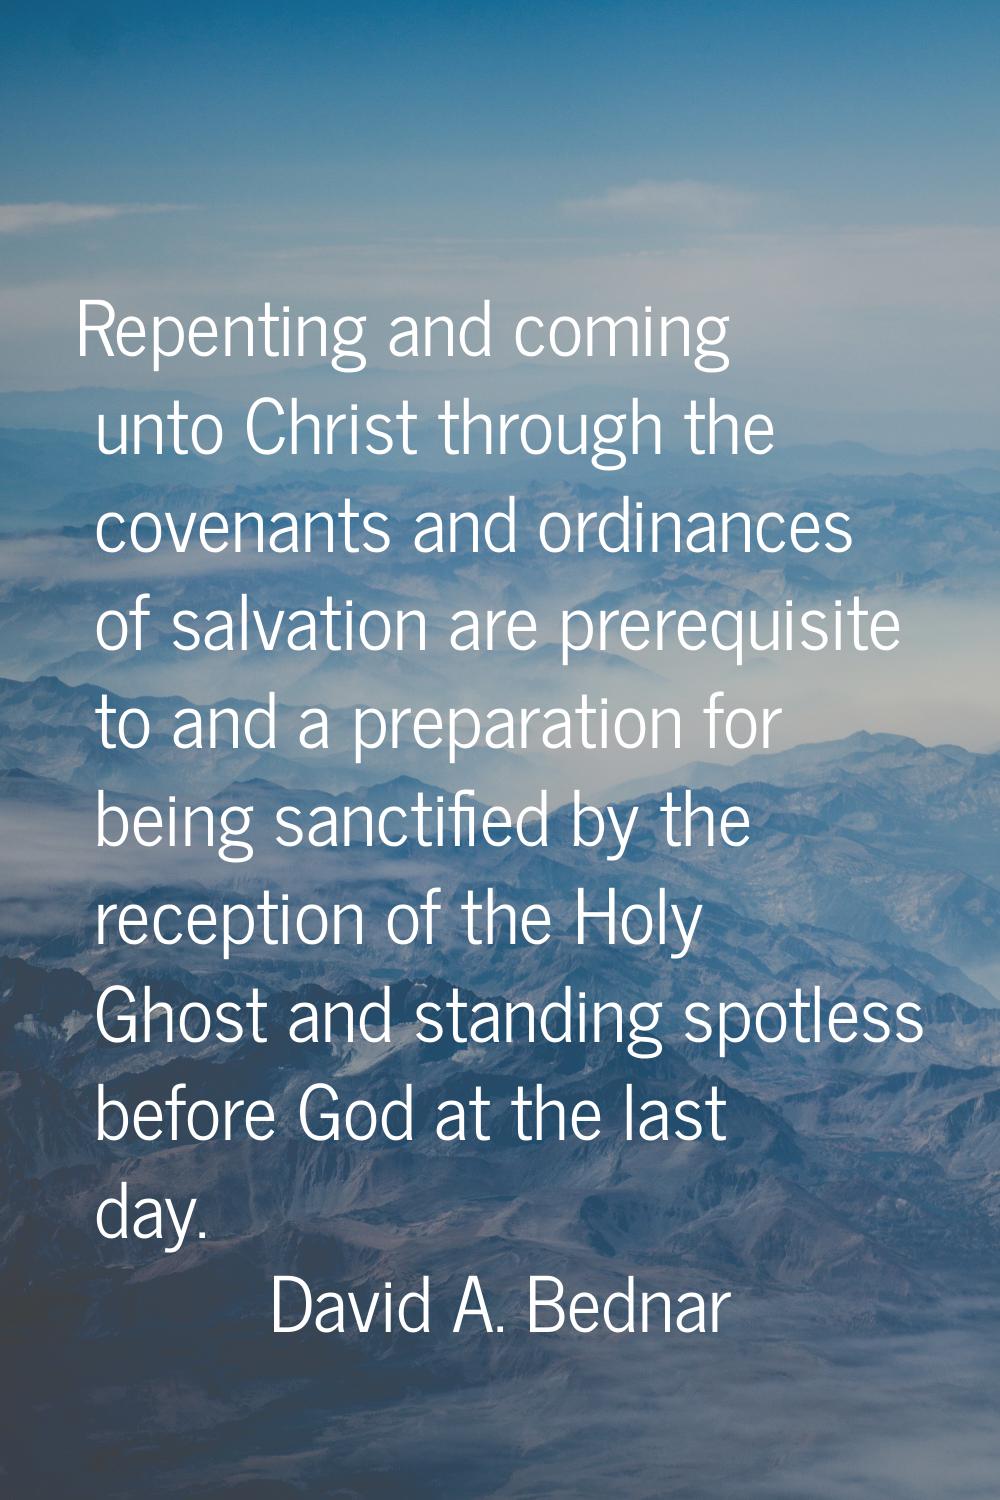 Repenting and coming unto Christ through the covenants and ordinances of salvation are prerequisite